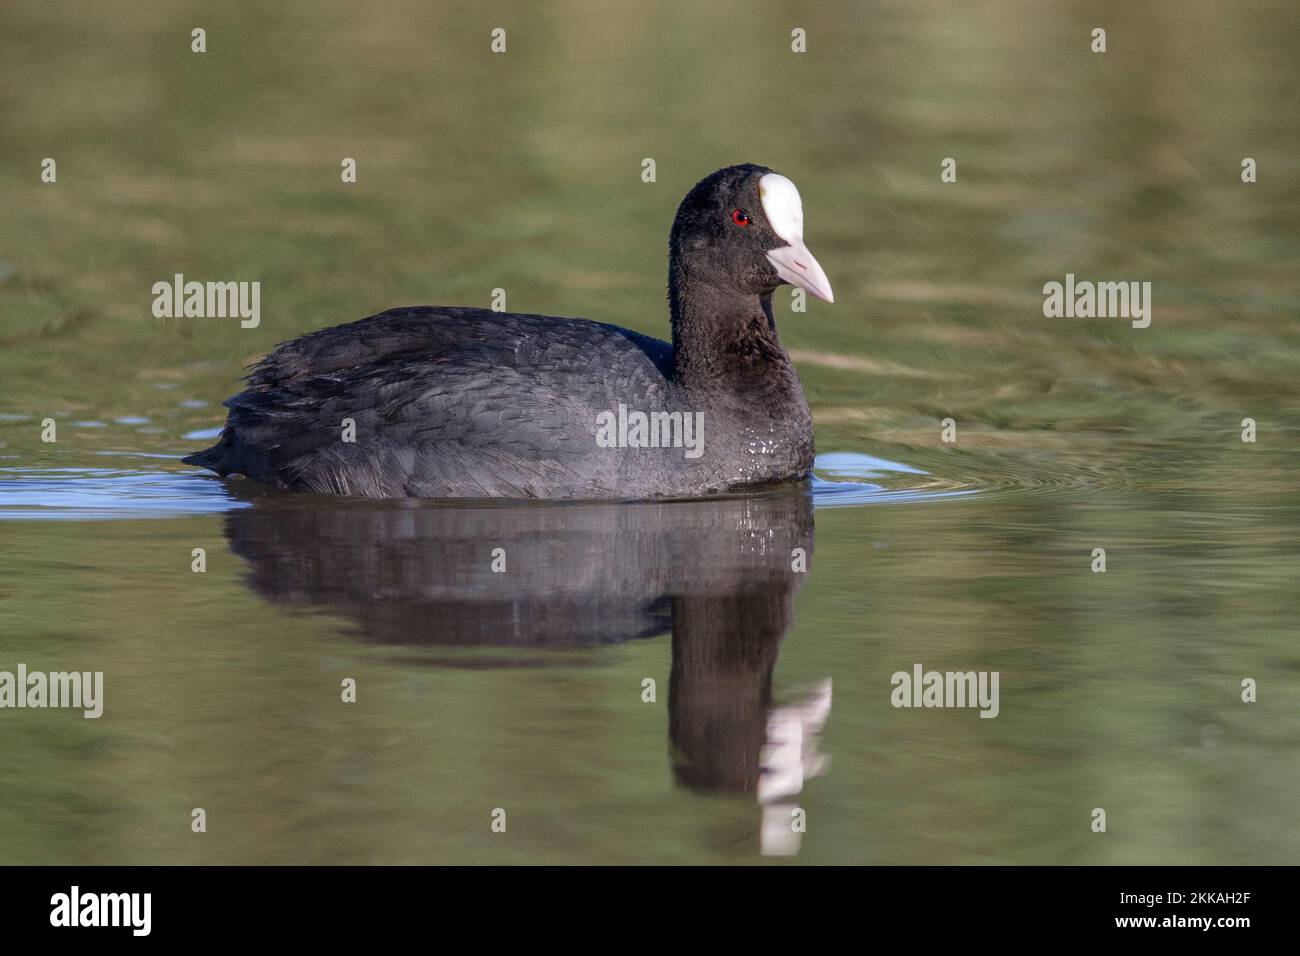 Eurasian coot, Fulica atra, with reflection, Andalusia, Spain Stock Photo